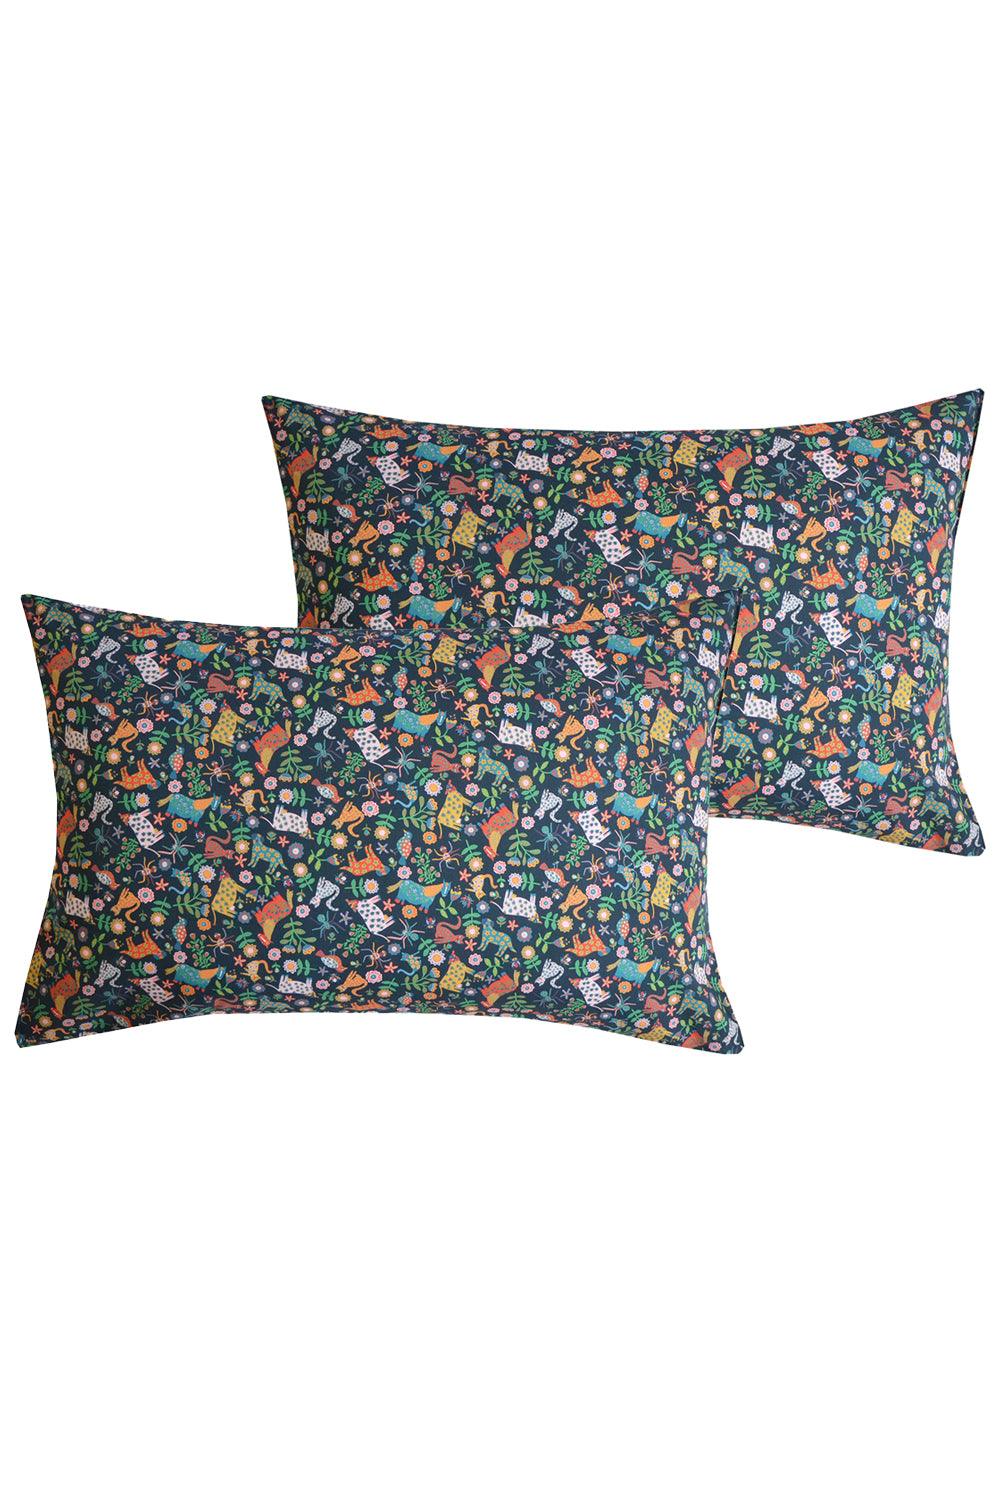 Pillowcase made with Liberty Fabric FOLK TAILS - Coco & Wolf